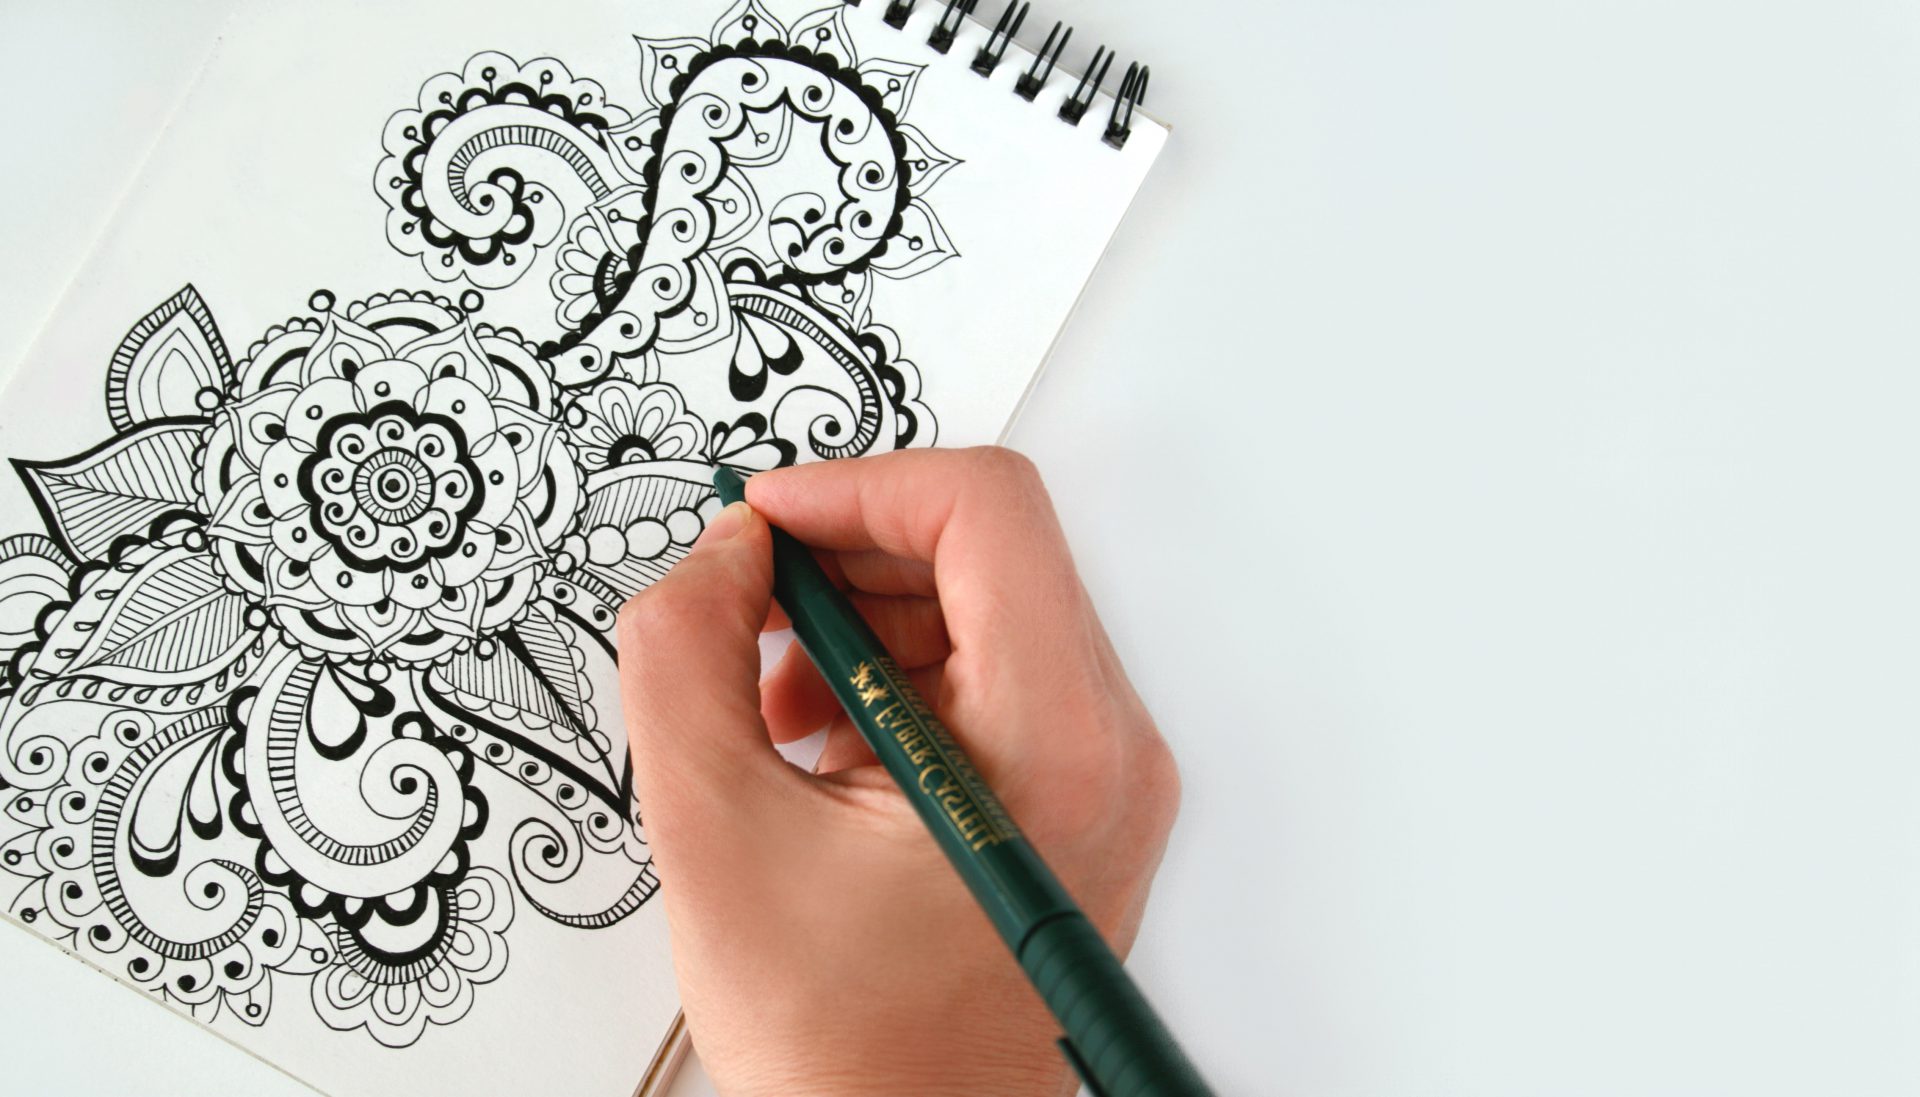 A person drawing with a pencil on paper